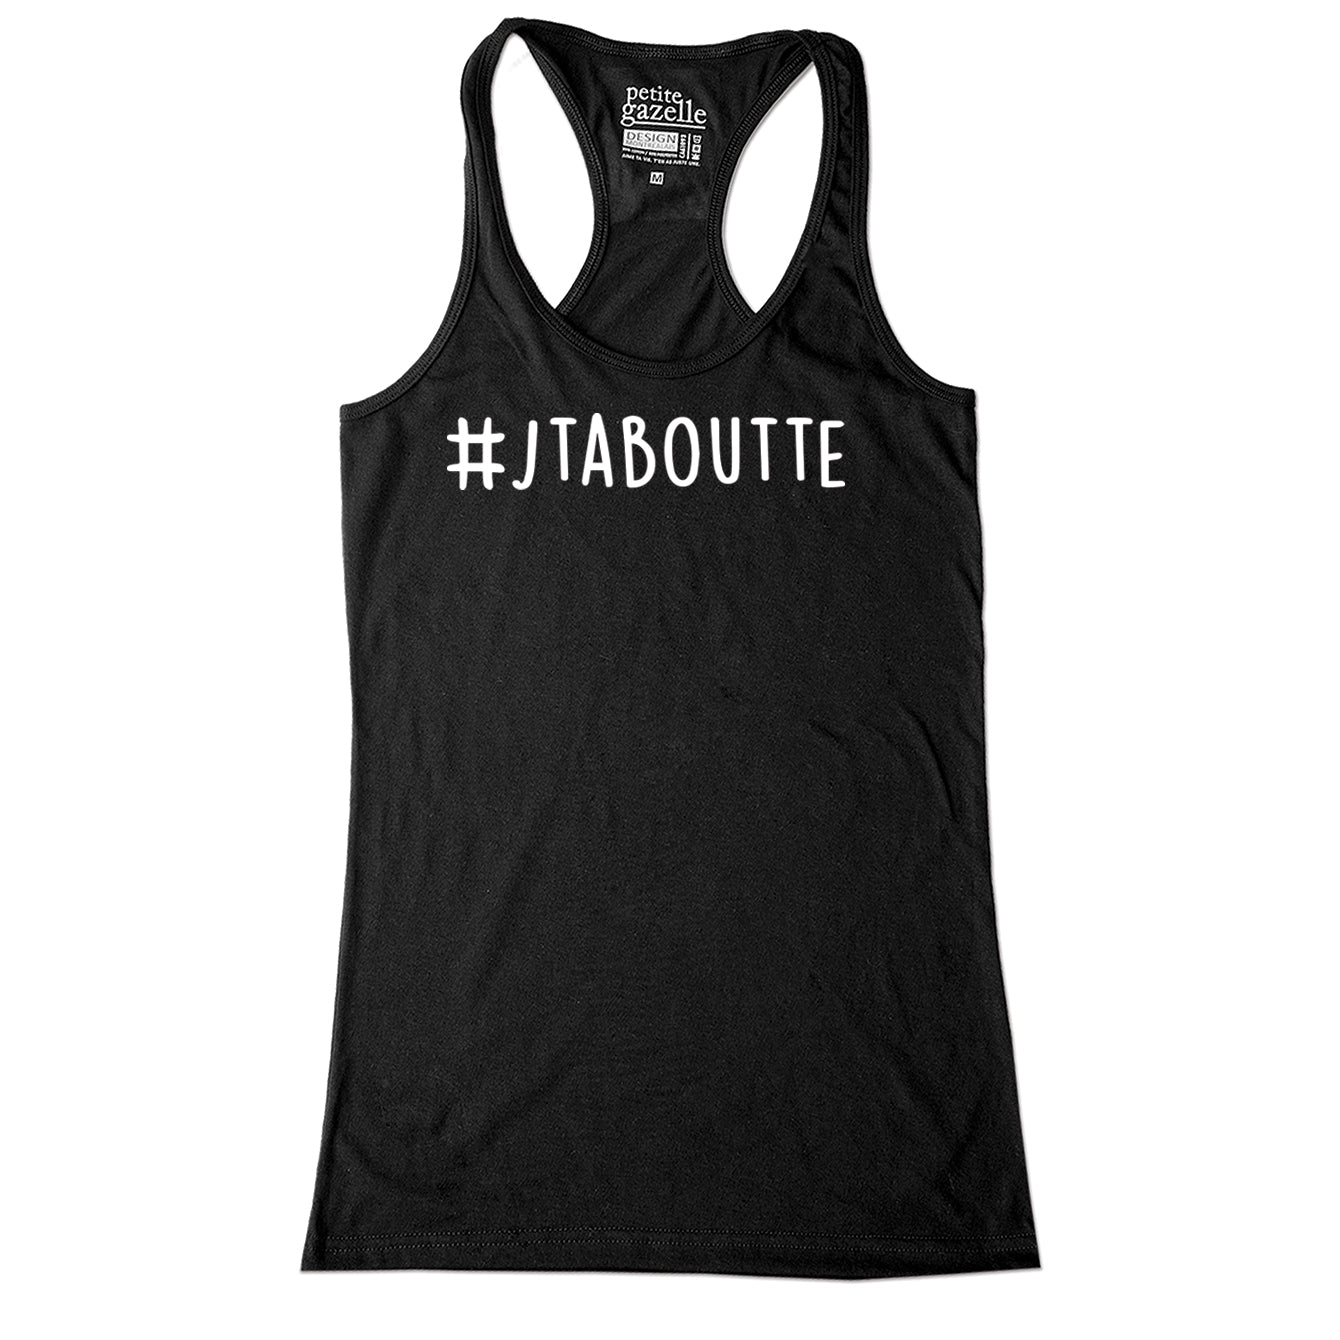 CAMISOLE | #JTABOUTTE